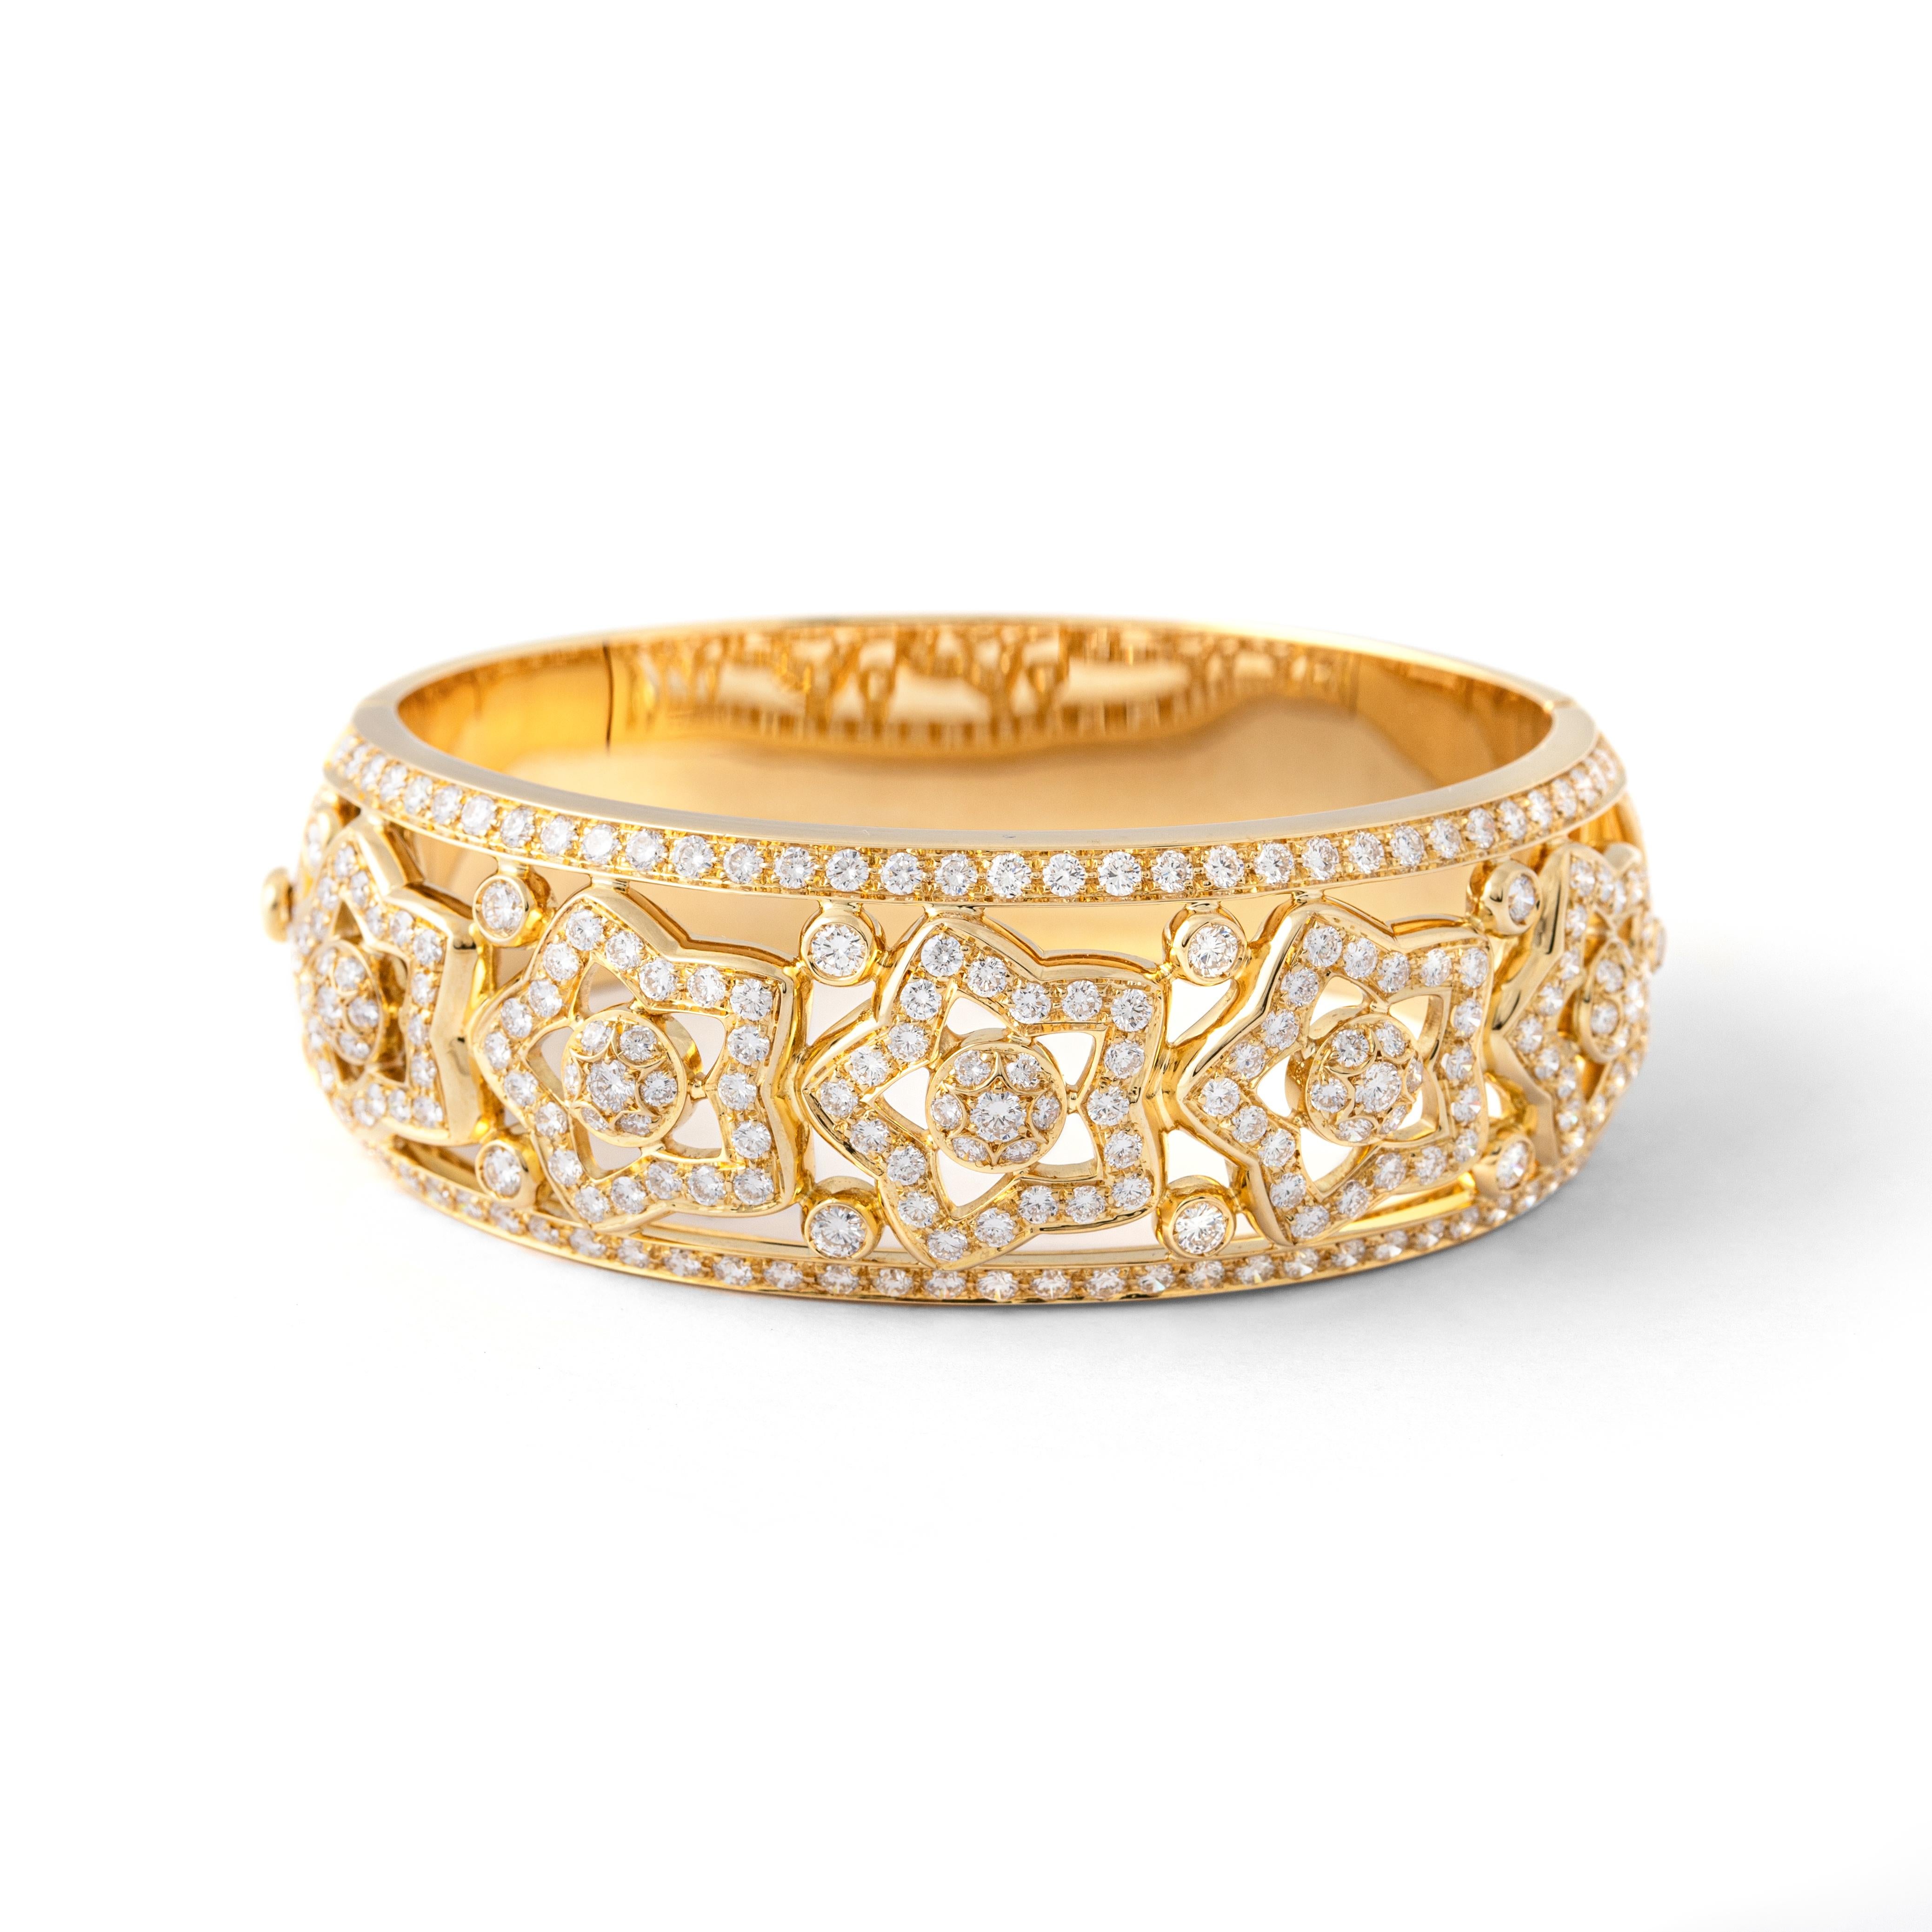 Bracelet in yellow gold representing flower set by 230 diamonds. Total 6.38 carats.

Introducing our stunning Yellow Gold Flower Bracelet, a dazzling representation of elegance and luxury. Crafted in radiant yellow gold, this exquisite piece